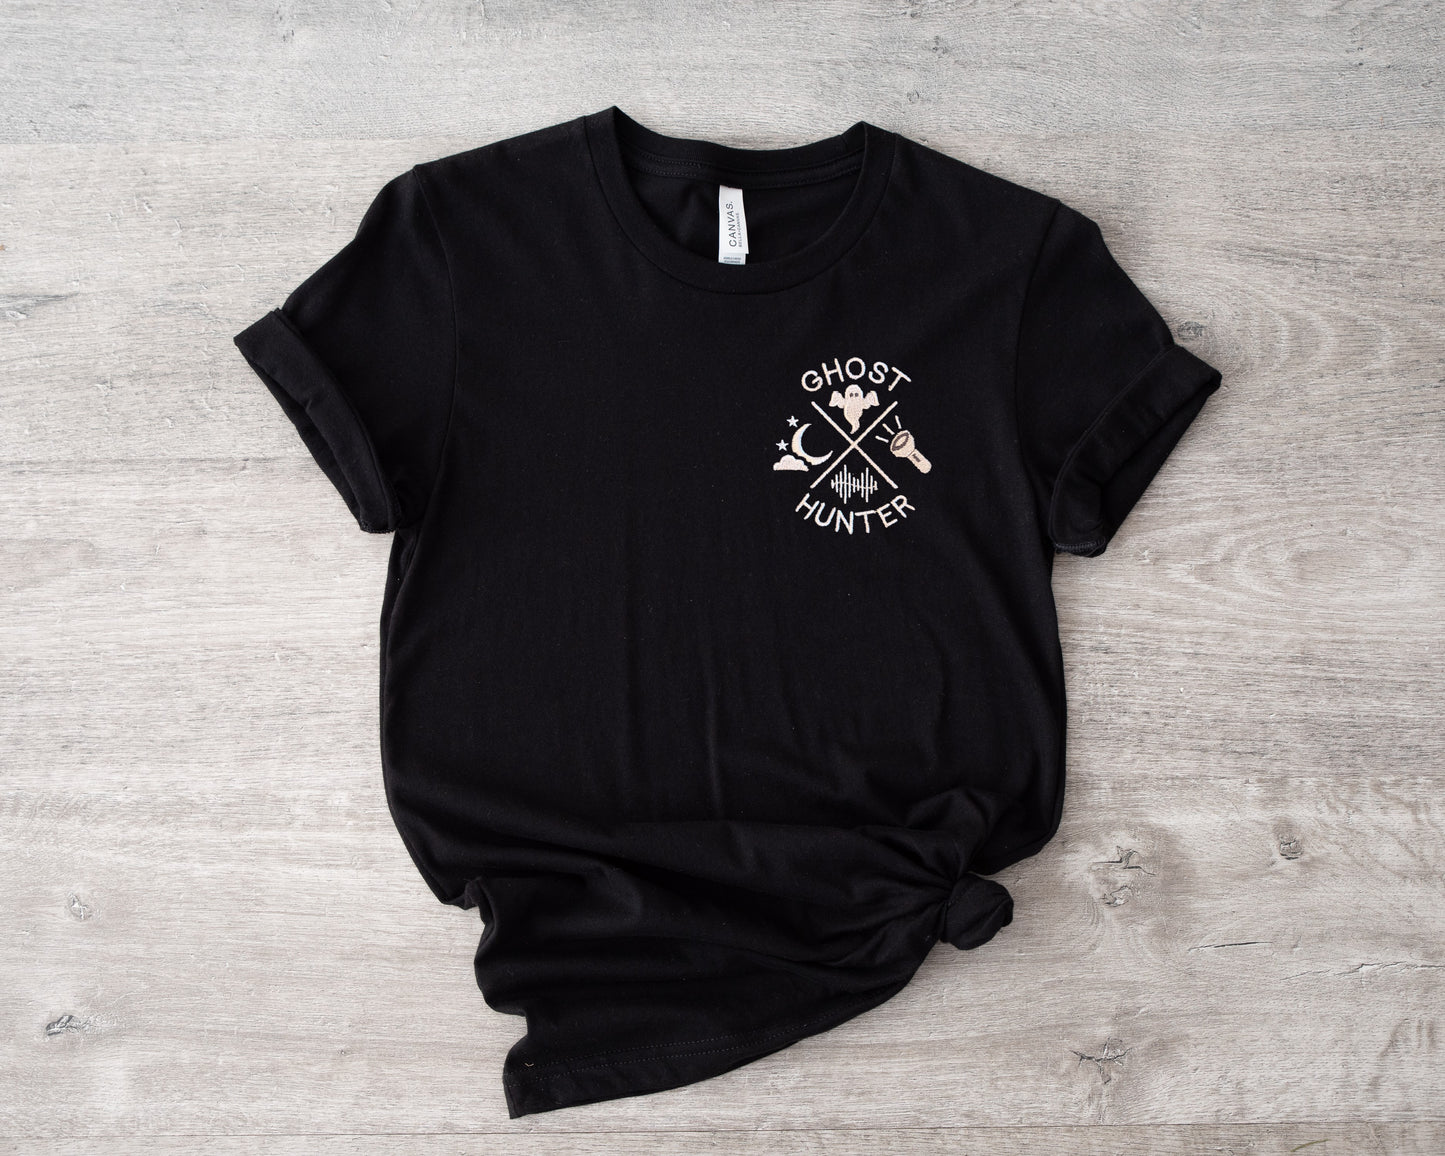 Ghost Hunter Embroidered Tee